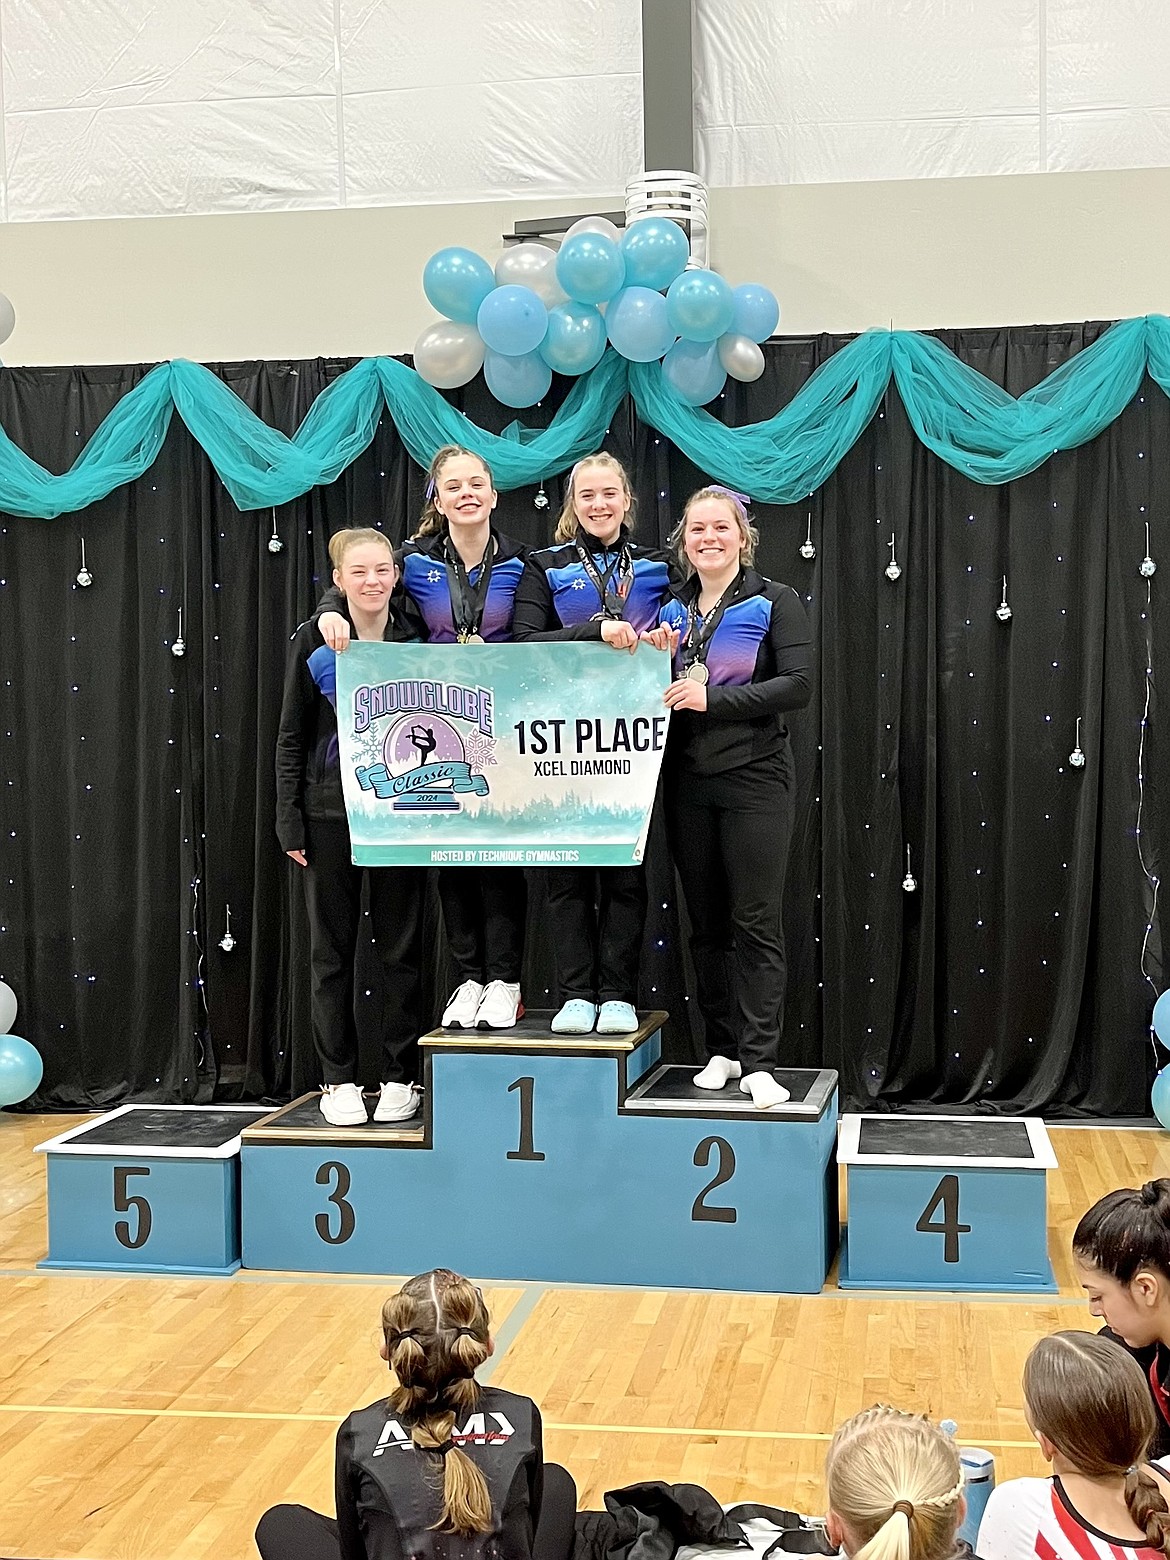 Courtesy photo
GEMS Athletic Center Diamond Team won 1st Place team at the Snowglobe Classic on March 8-10 in Post Falls. From left are Kylie Burg, Evelyn Oswell, Evyn Lyon and Dakota Caudle.